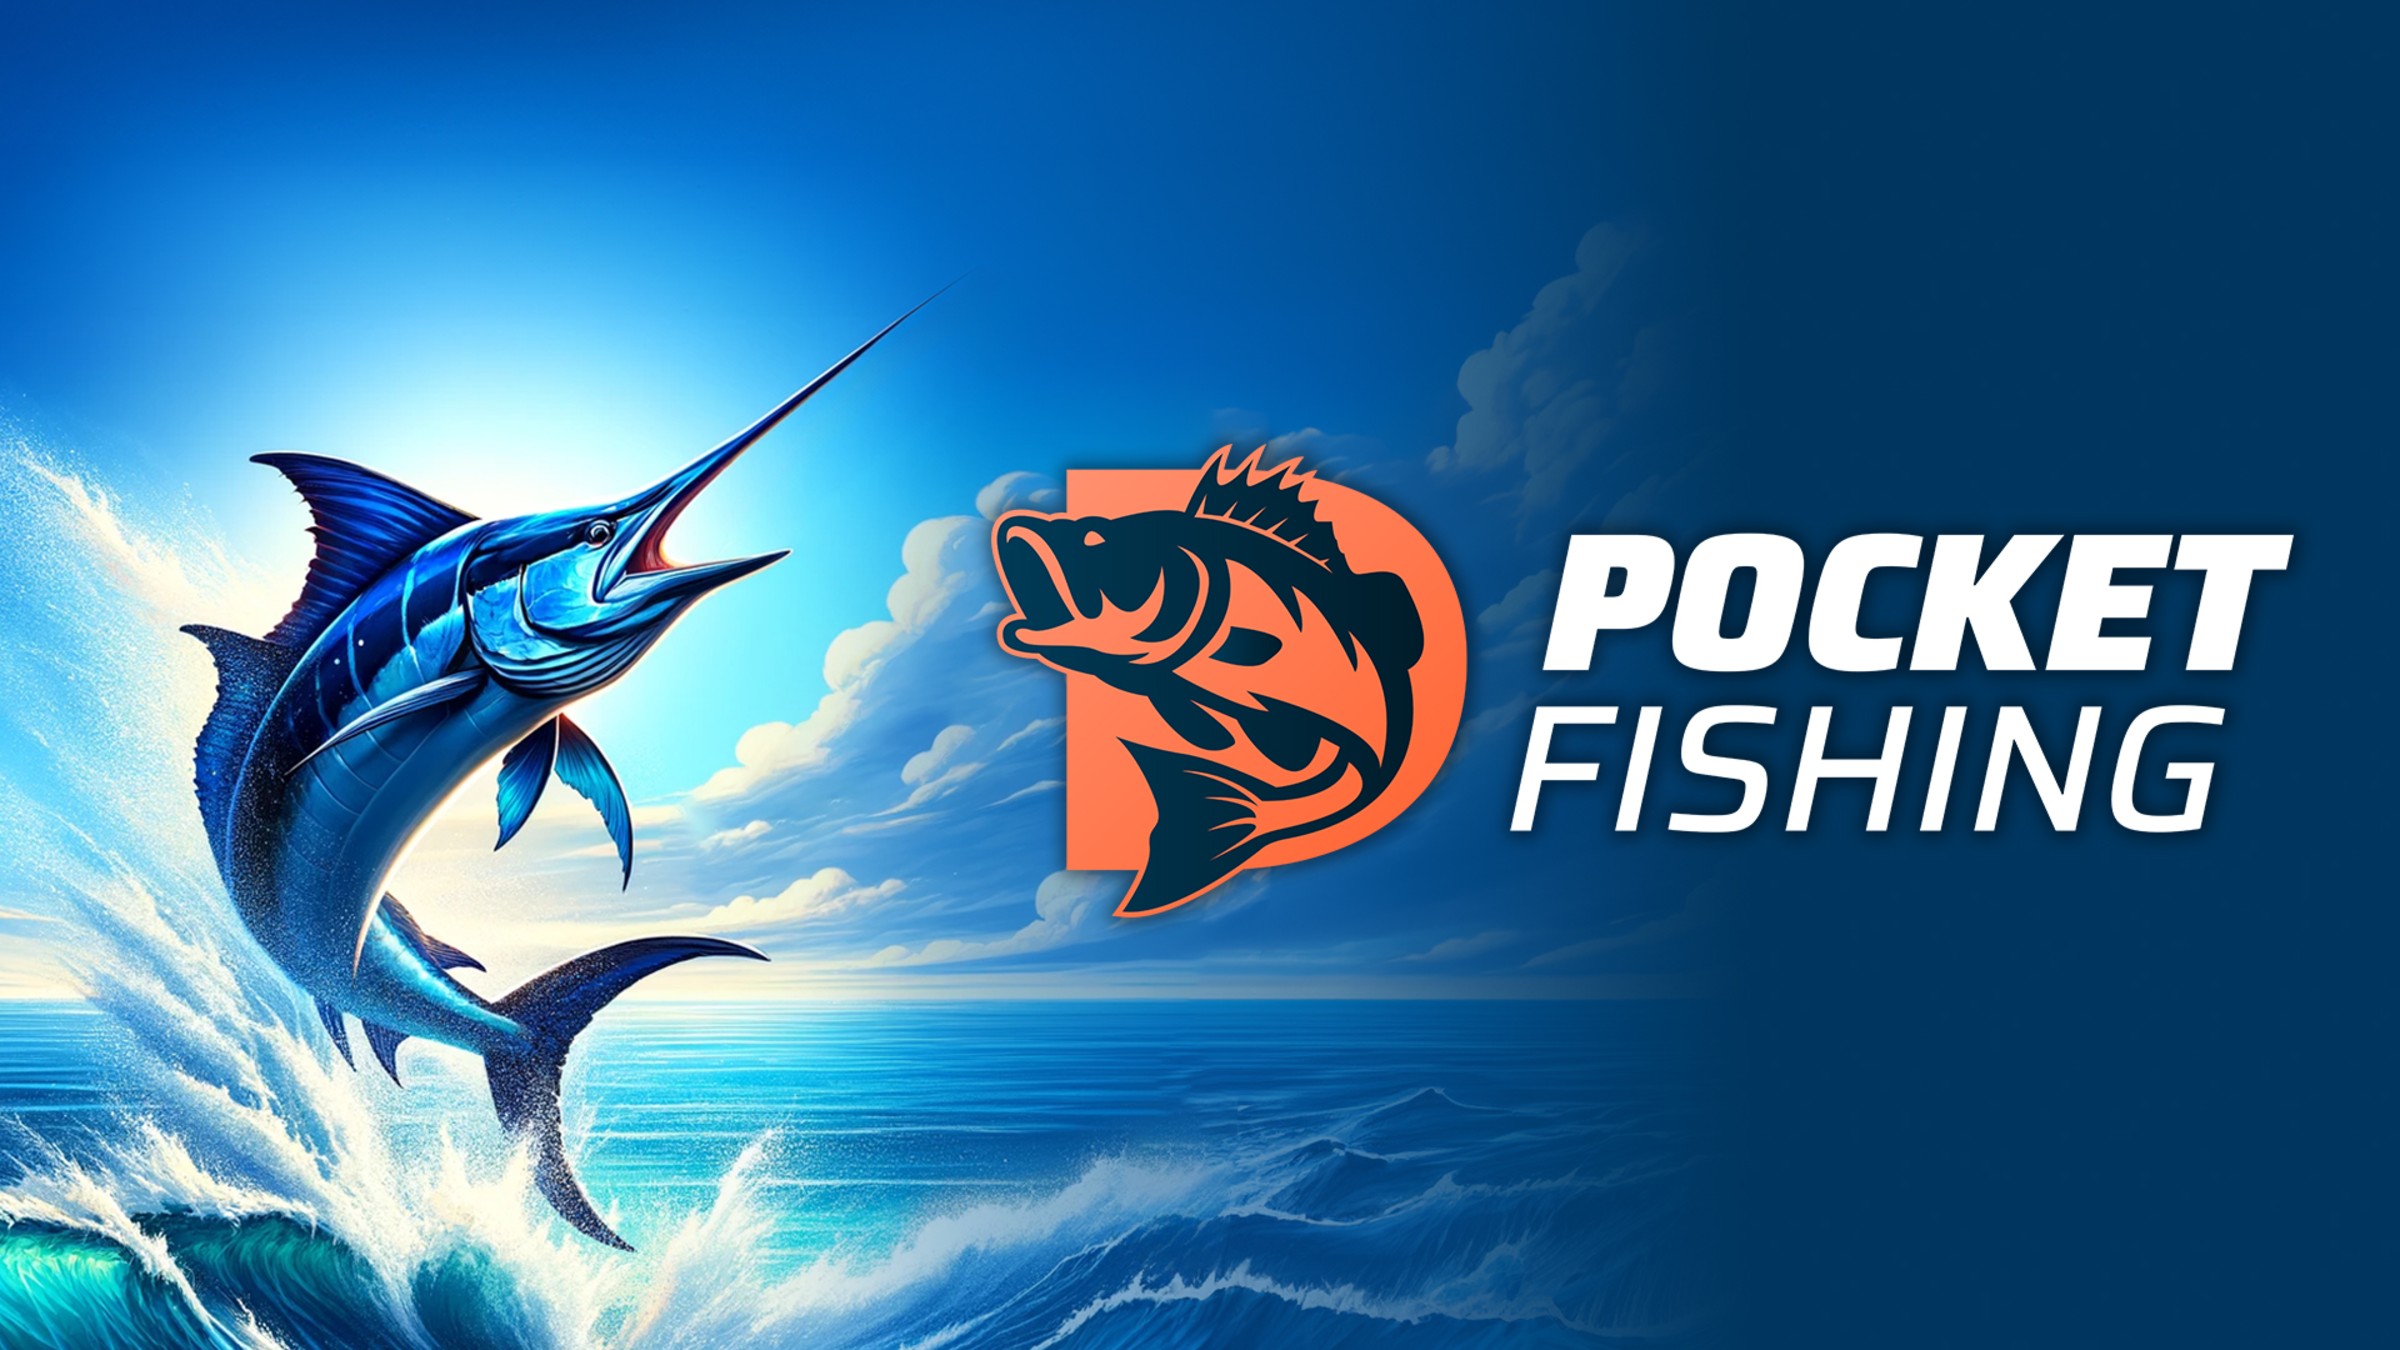 Pocket Fishing for Nintendo Switch - Nintendo Official Site